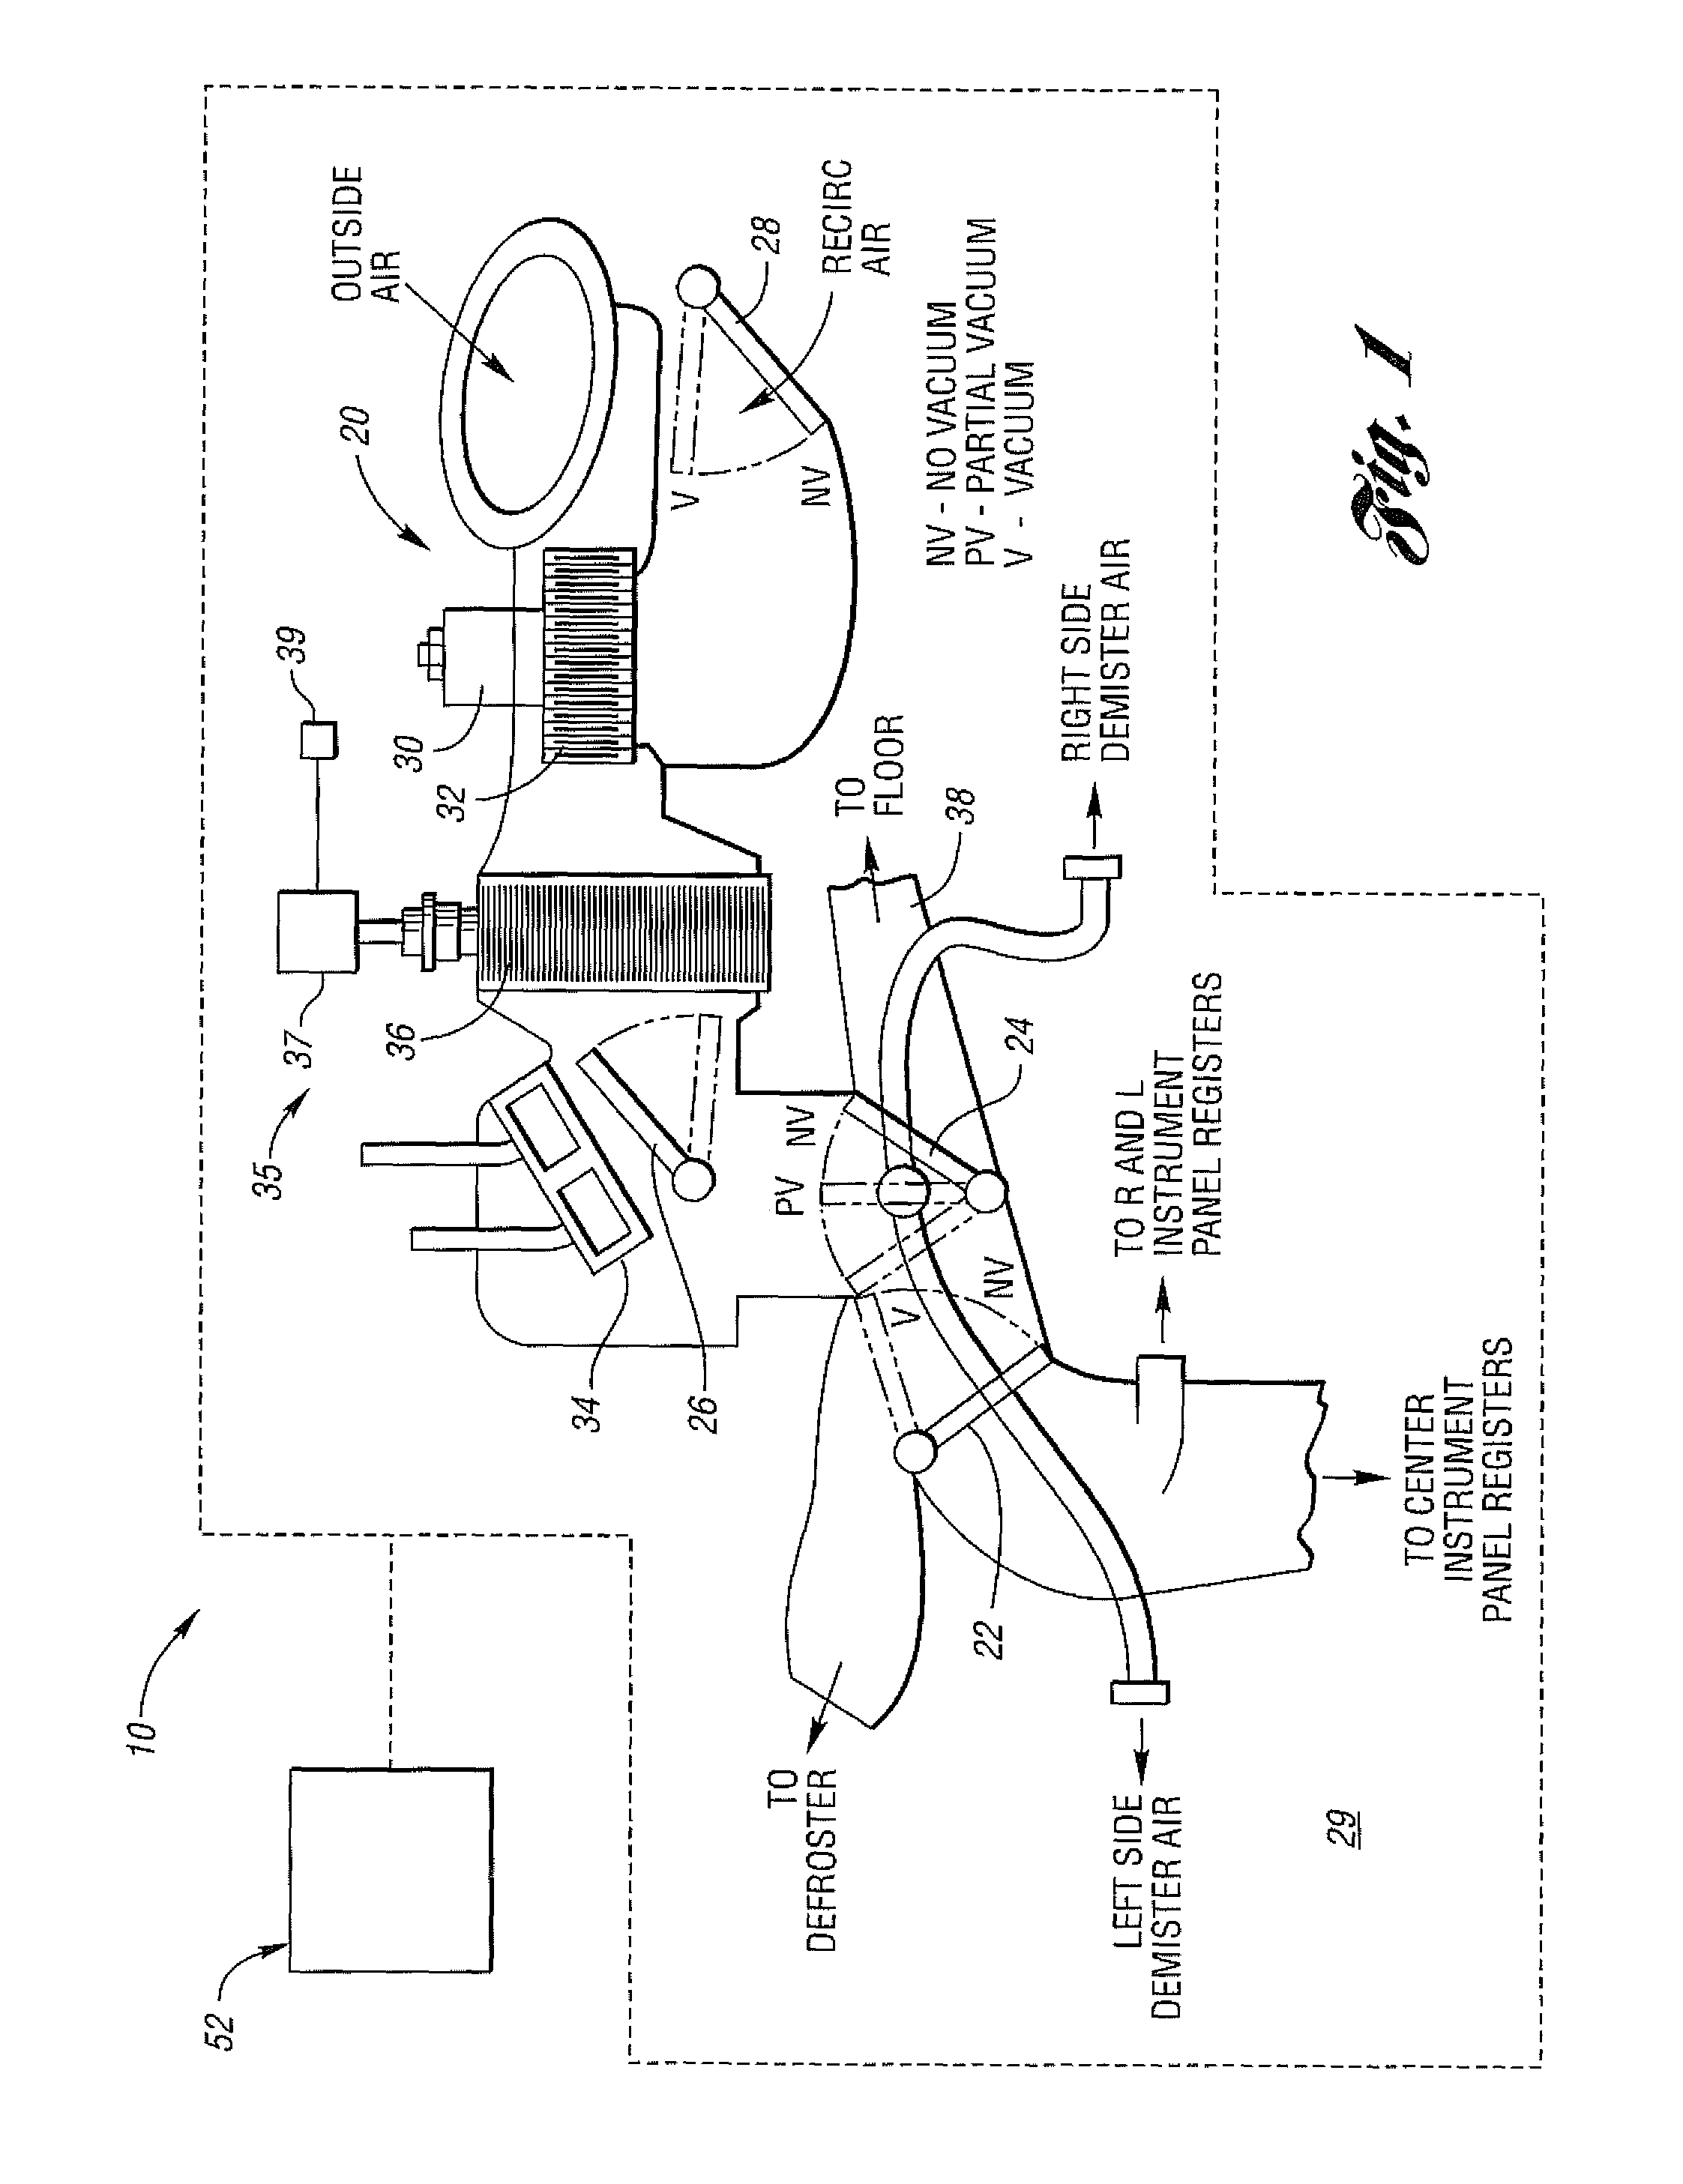 Climate control system and method for optimizing energy consumption of a vehicle